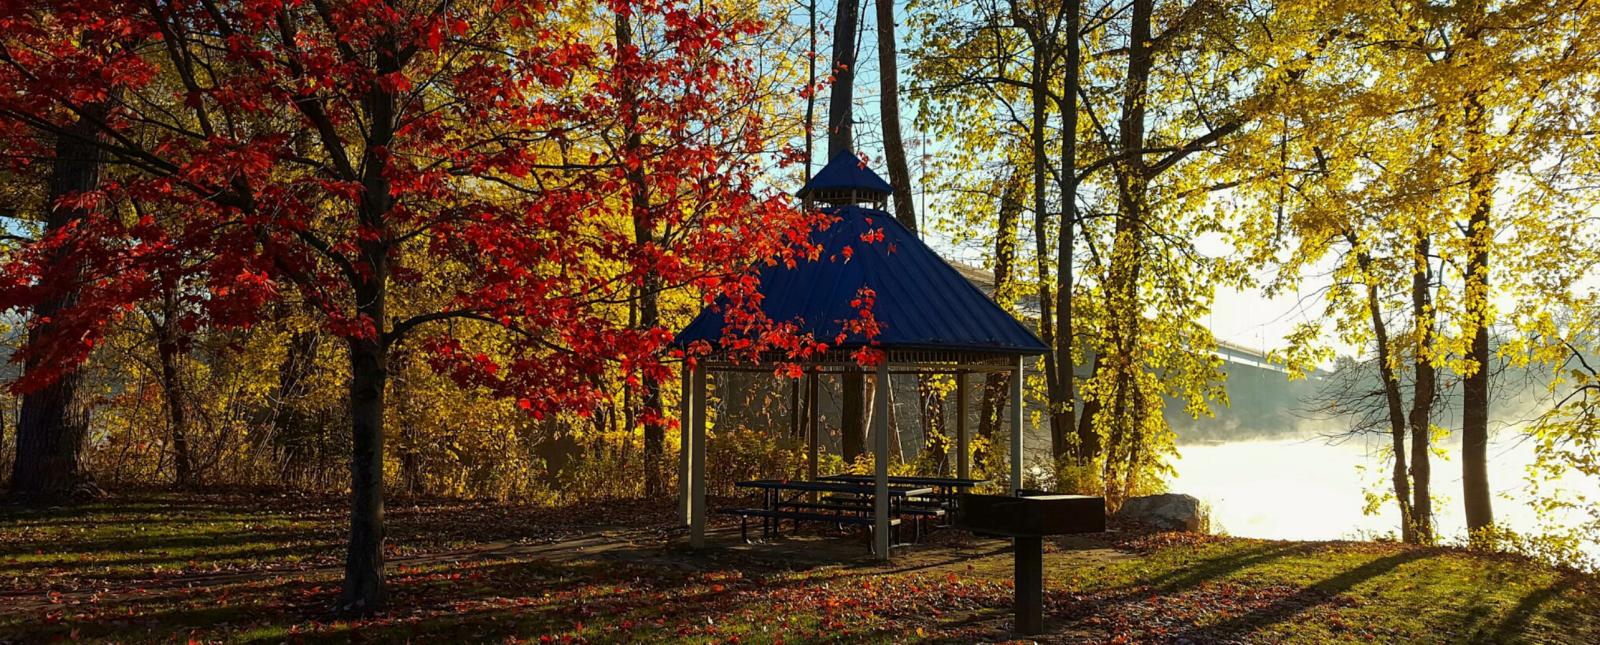 Gazebo at Windsor Meadows State Park (Flickr@keith-thom)